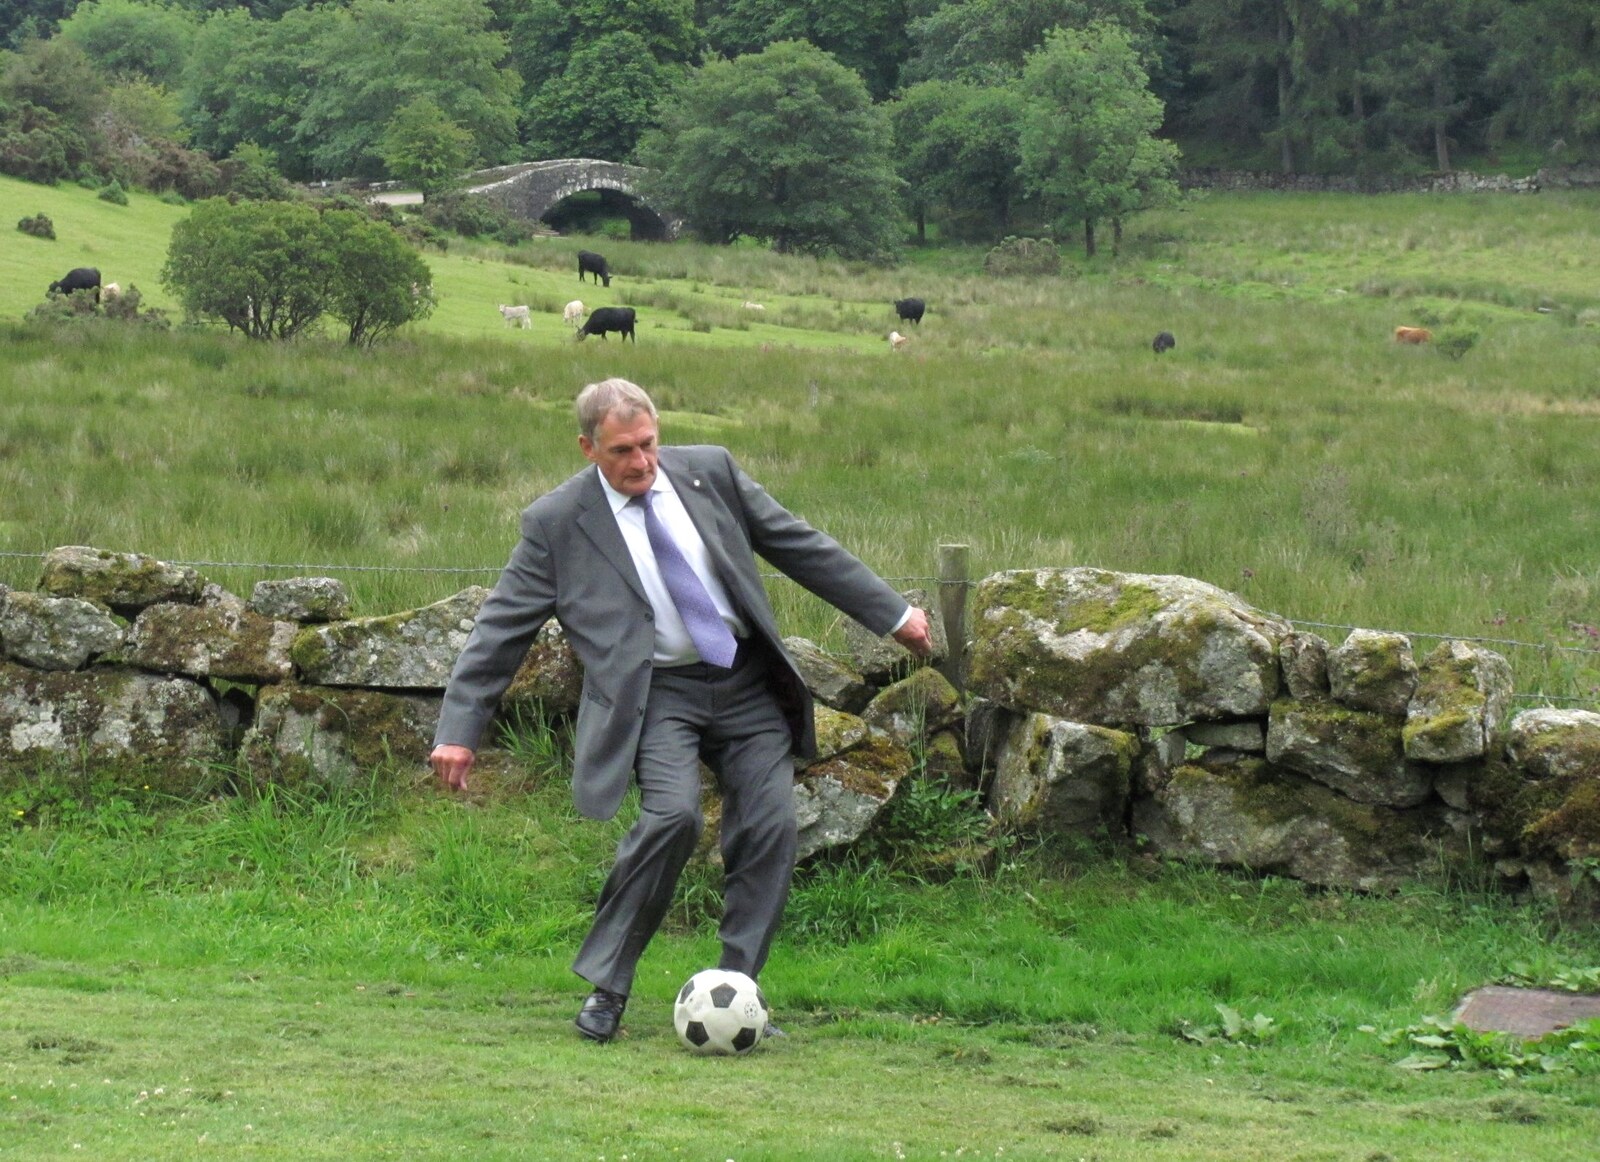 More kickabout action from Mike's Memorial, Prince Hall Hotel, Two Bridges, Dartmoor - 12th July 2011